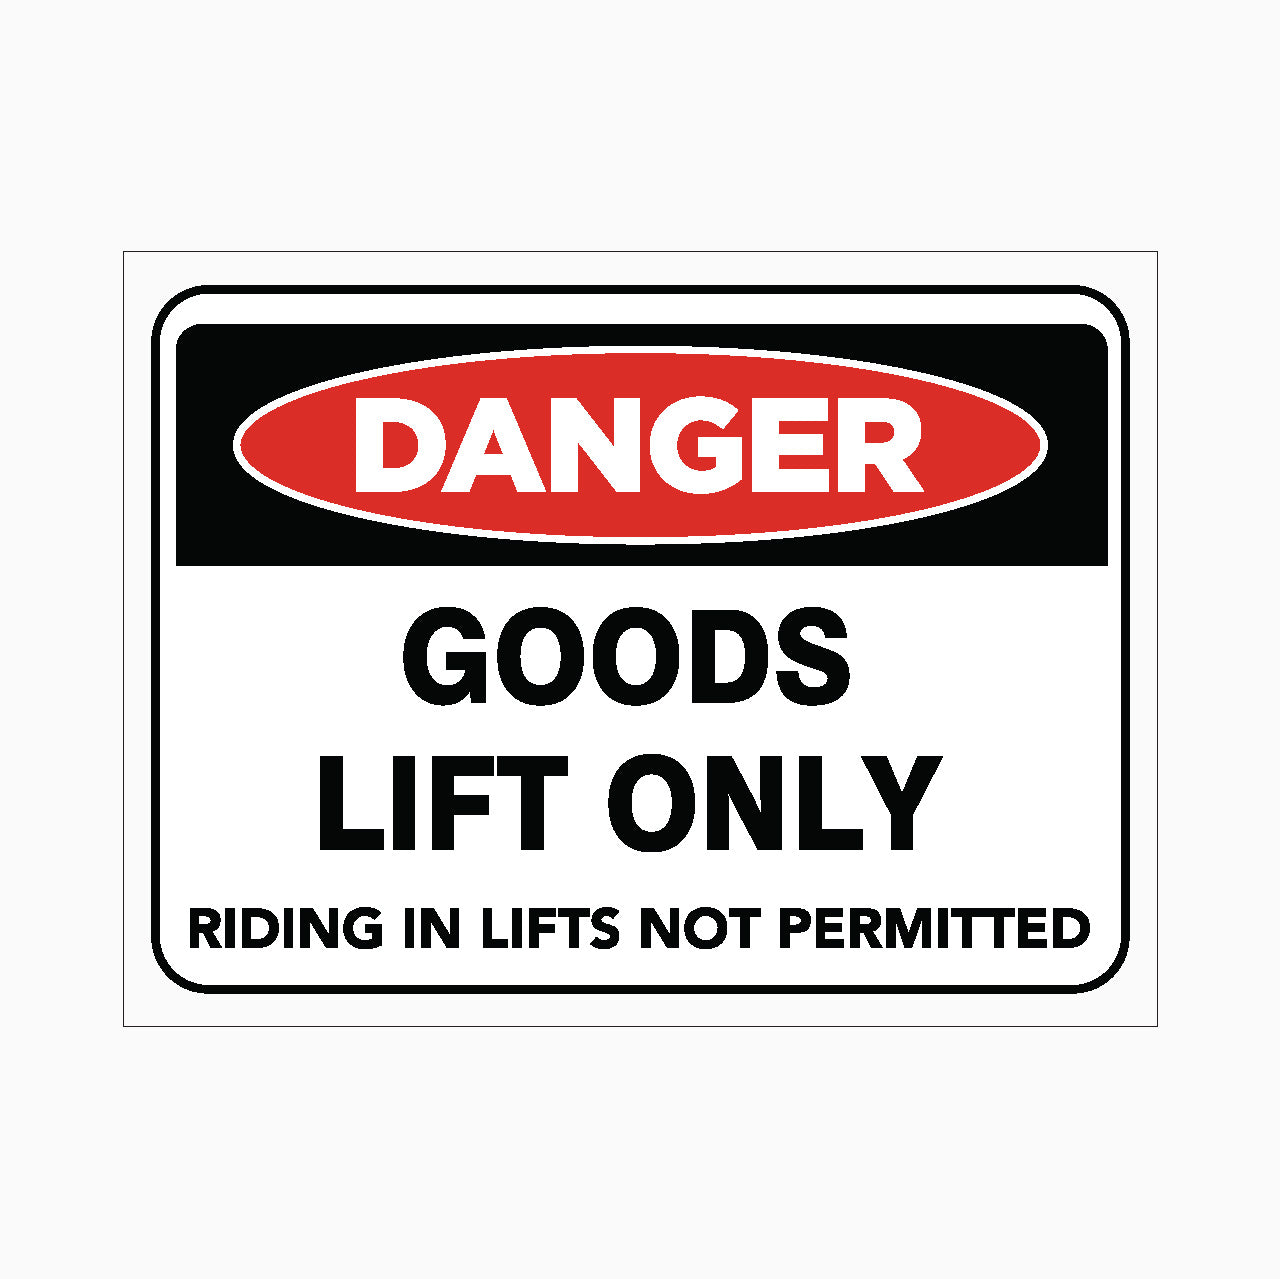 GOODS LIFT ONLY - RIDING IN LIFTS NOT PERMITTED - GET SIGNS - GANGER SIGNS IN AUSTRALIA